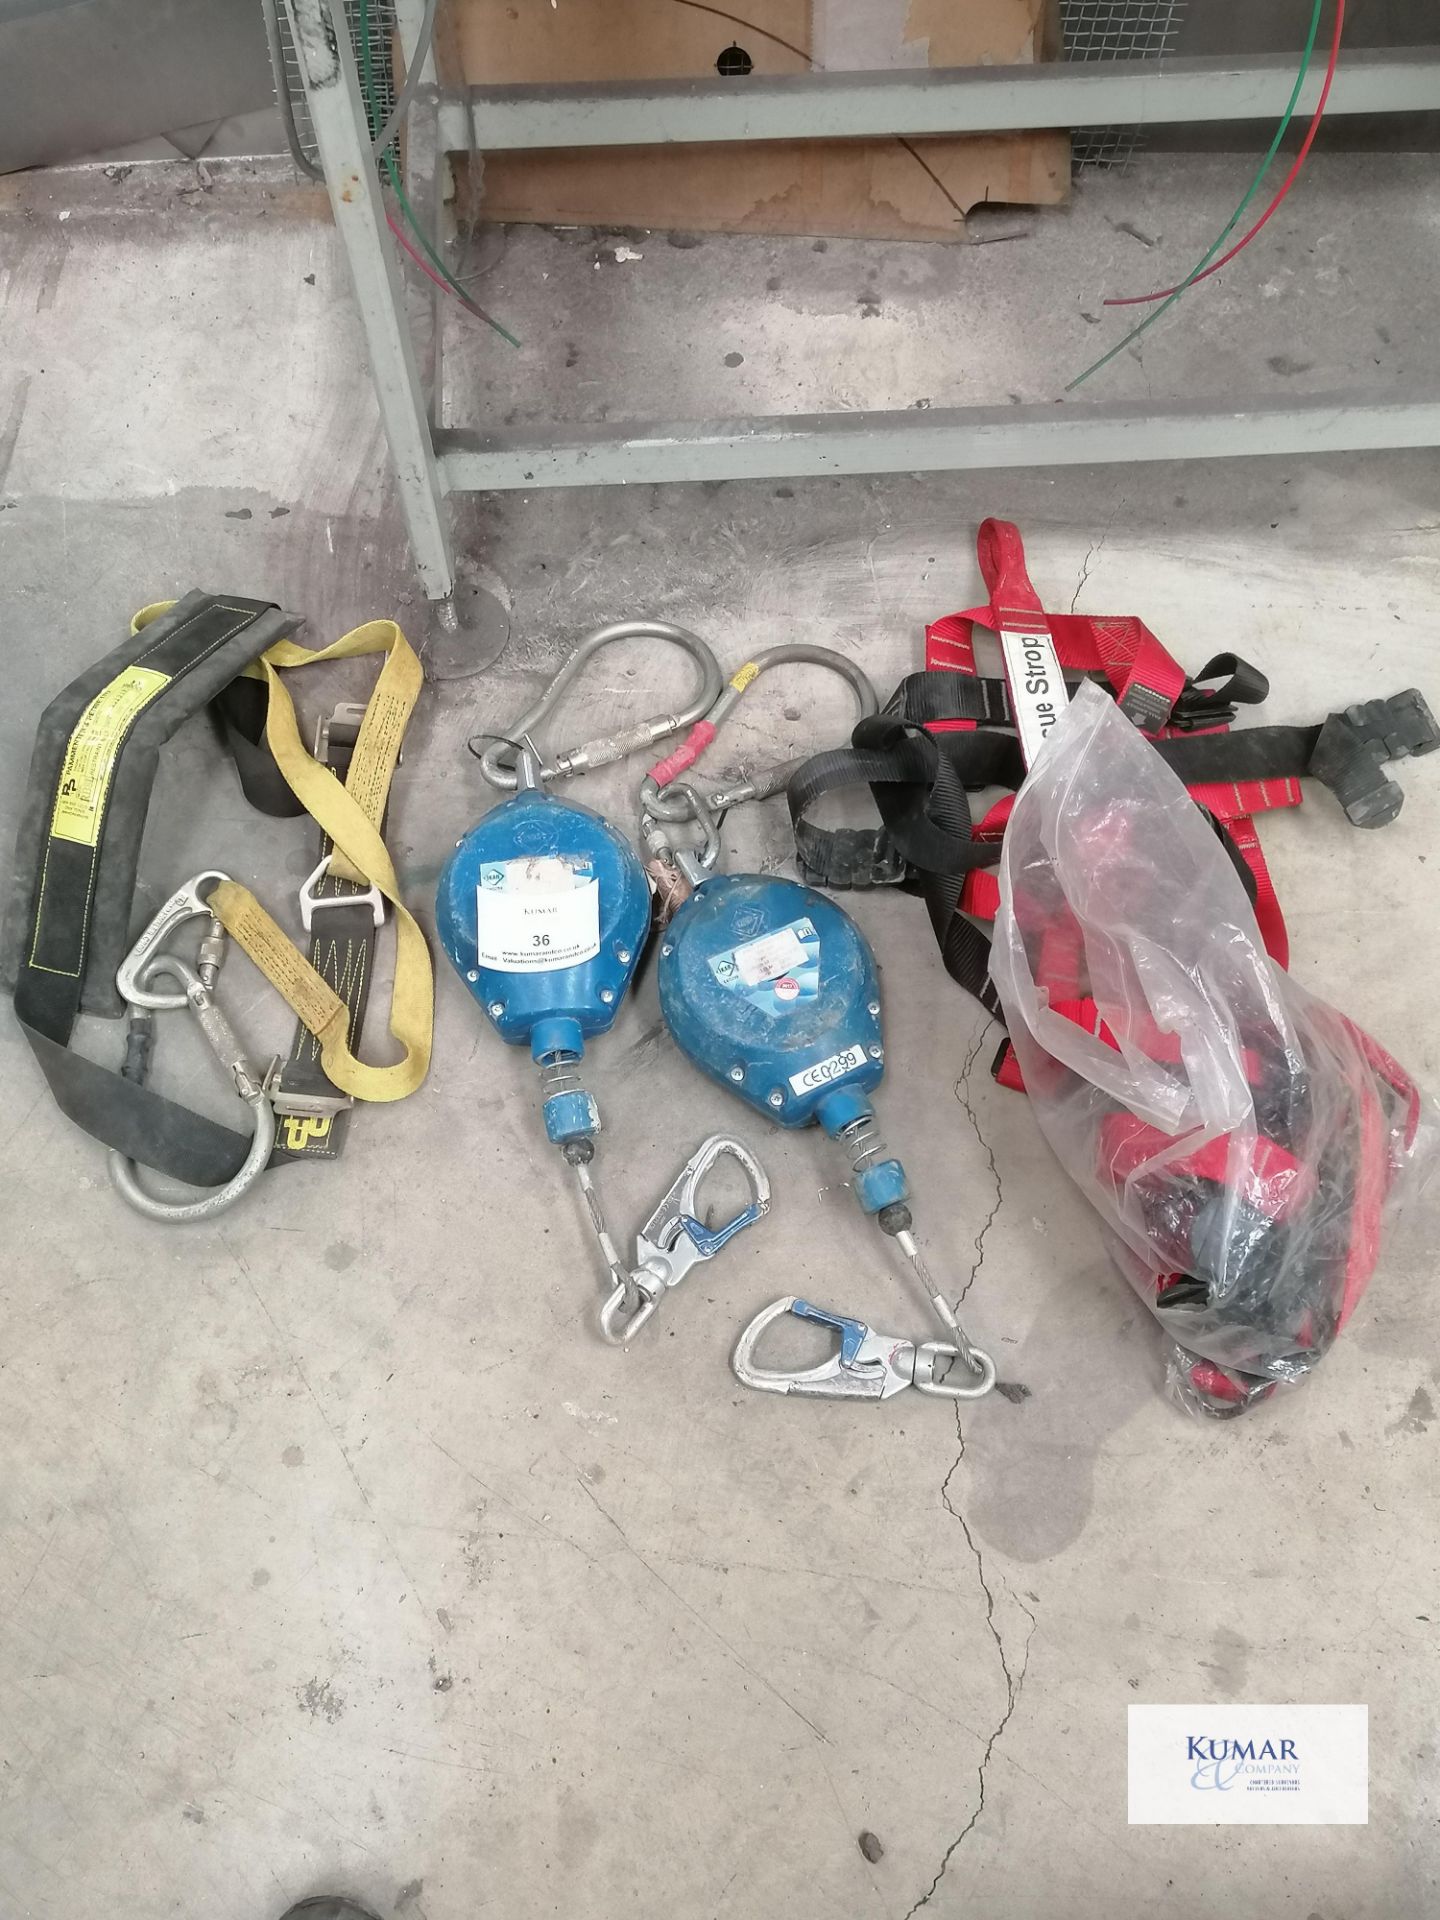 2 x Fall arresters and harnesses